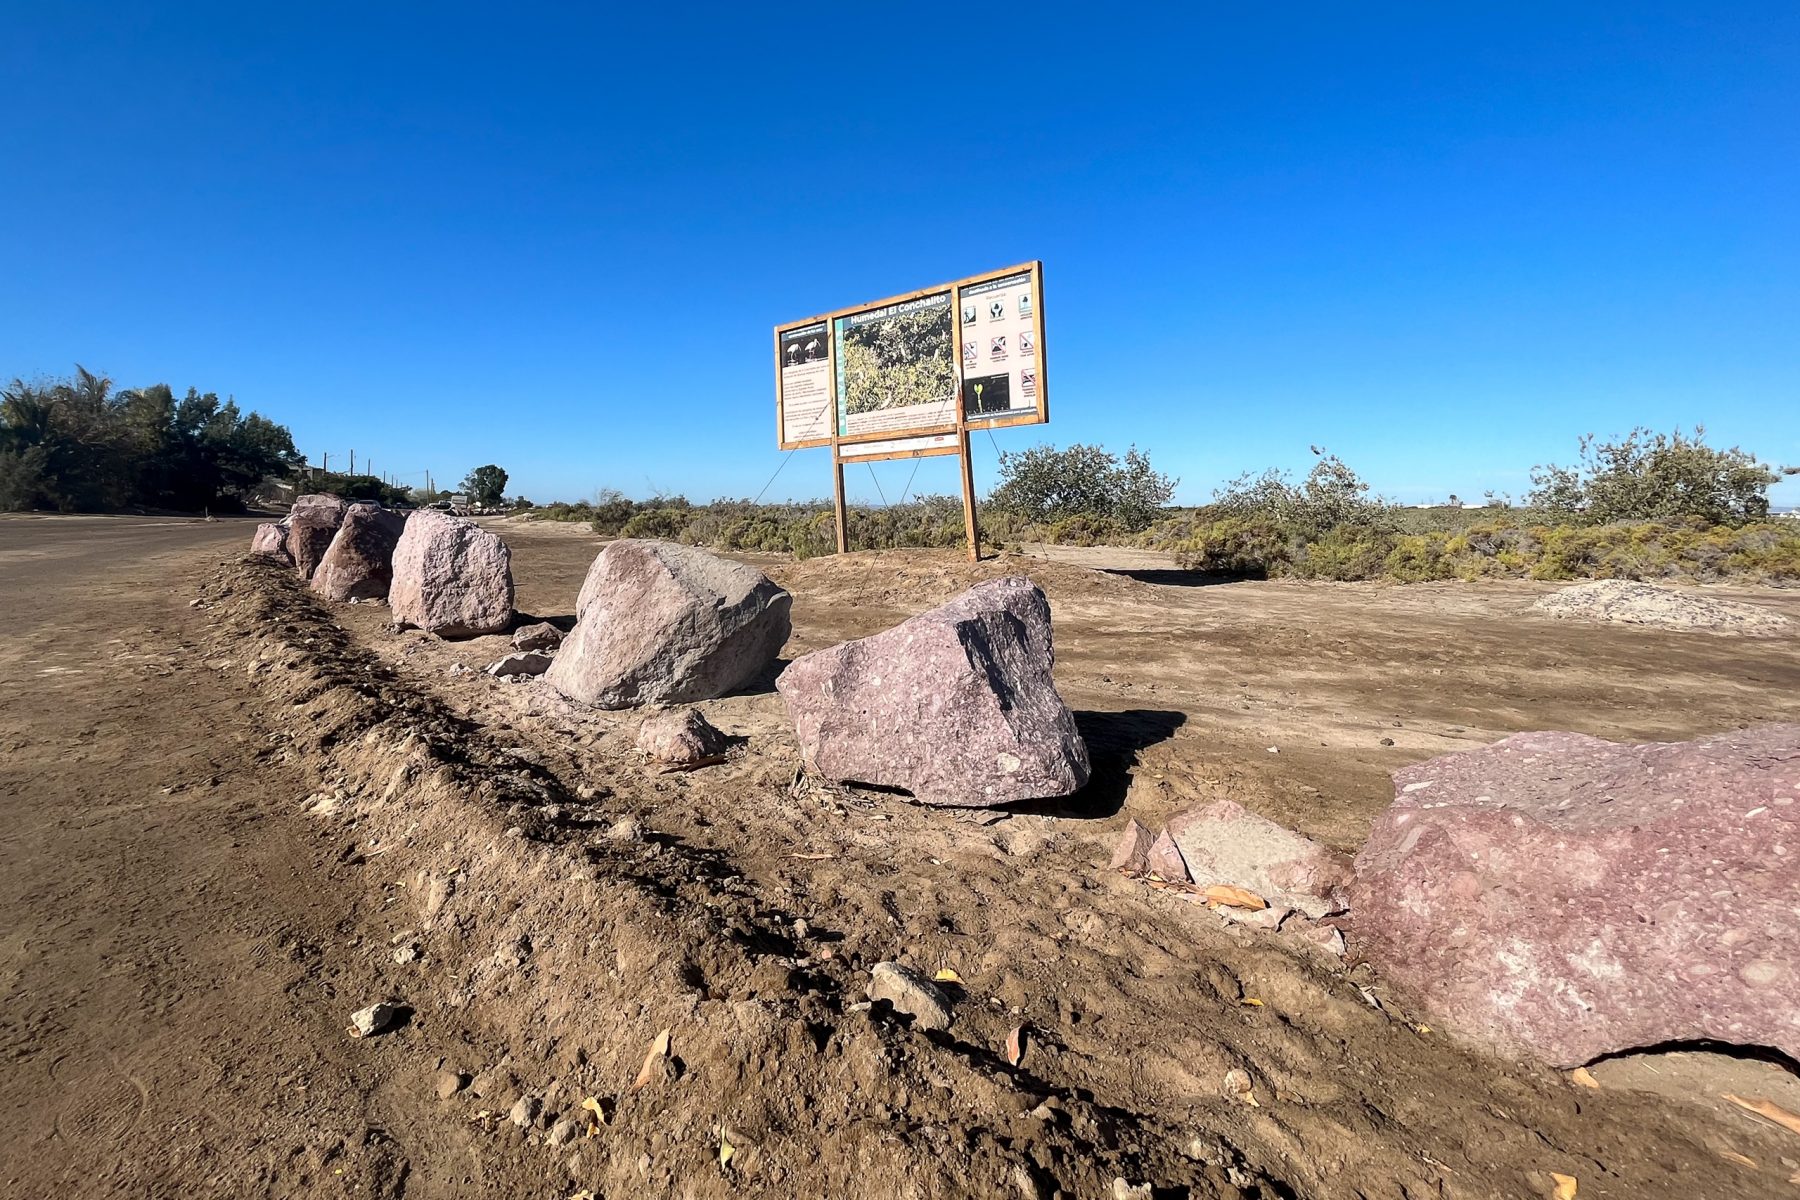 A line of boulders on dirt ground, bright blue sky